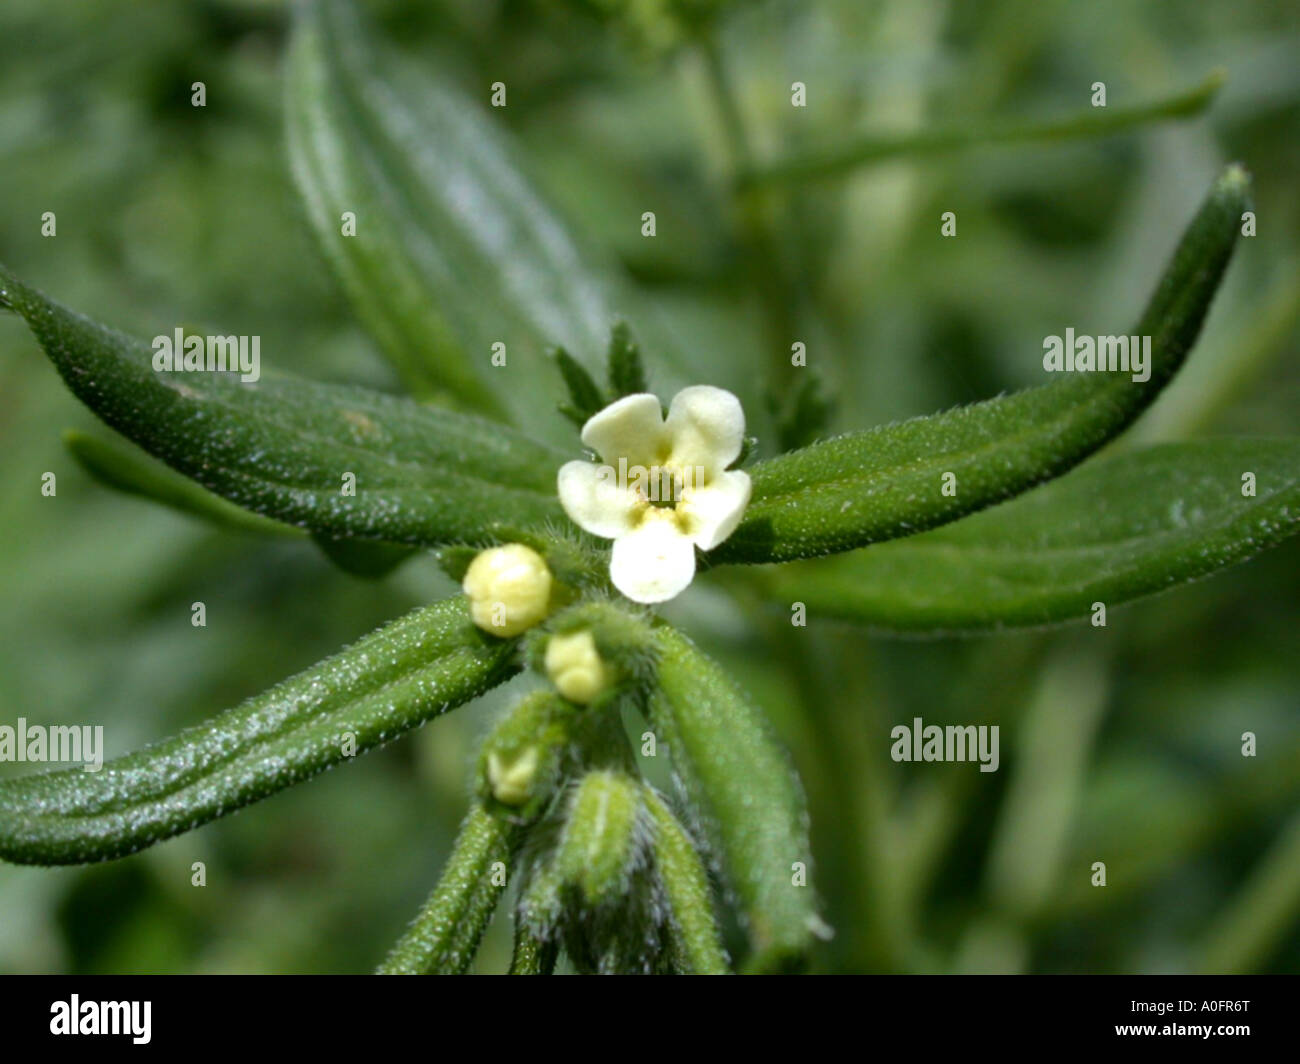 common gromwell, pearl gromwell, European gromwell (Lithospermum officinale), flower Stock Photo